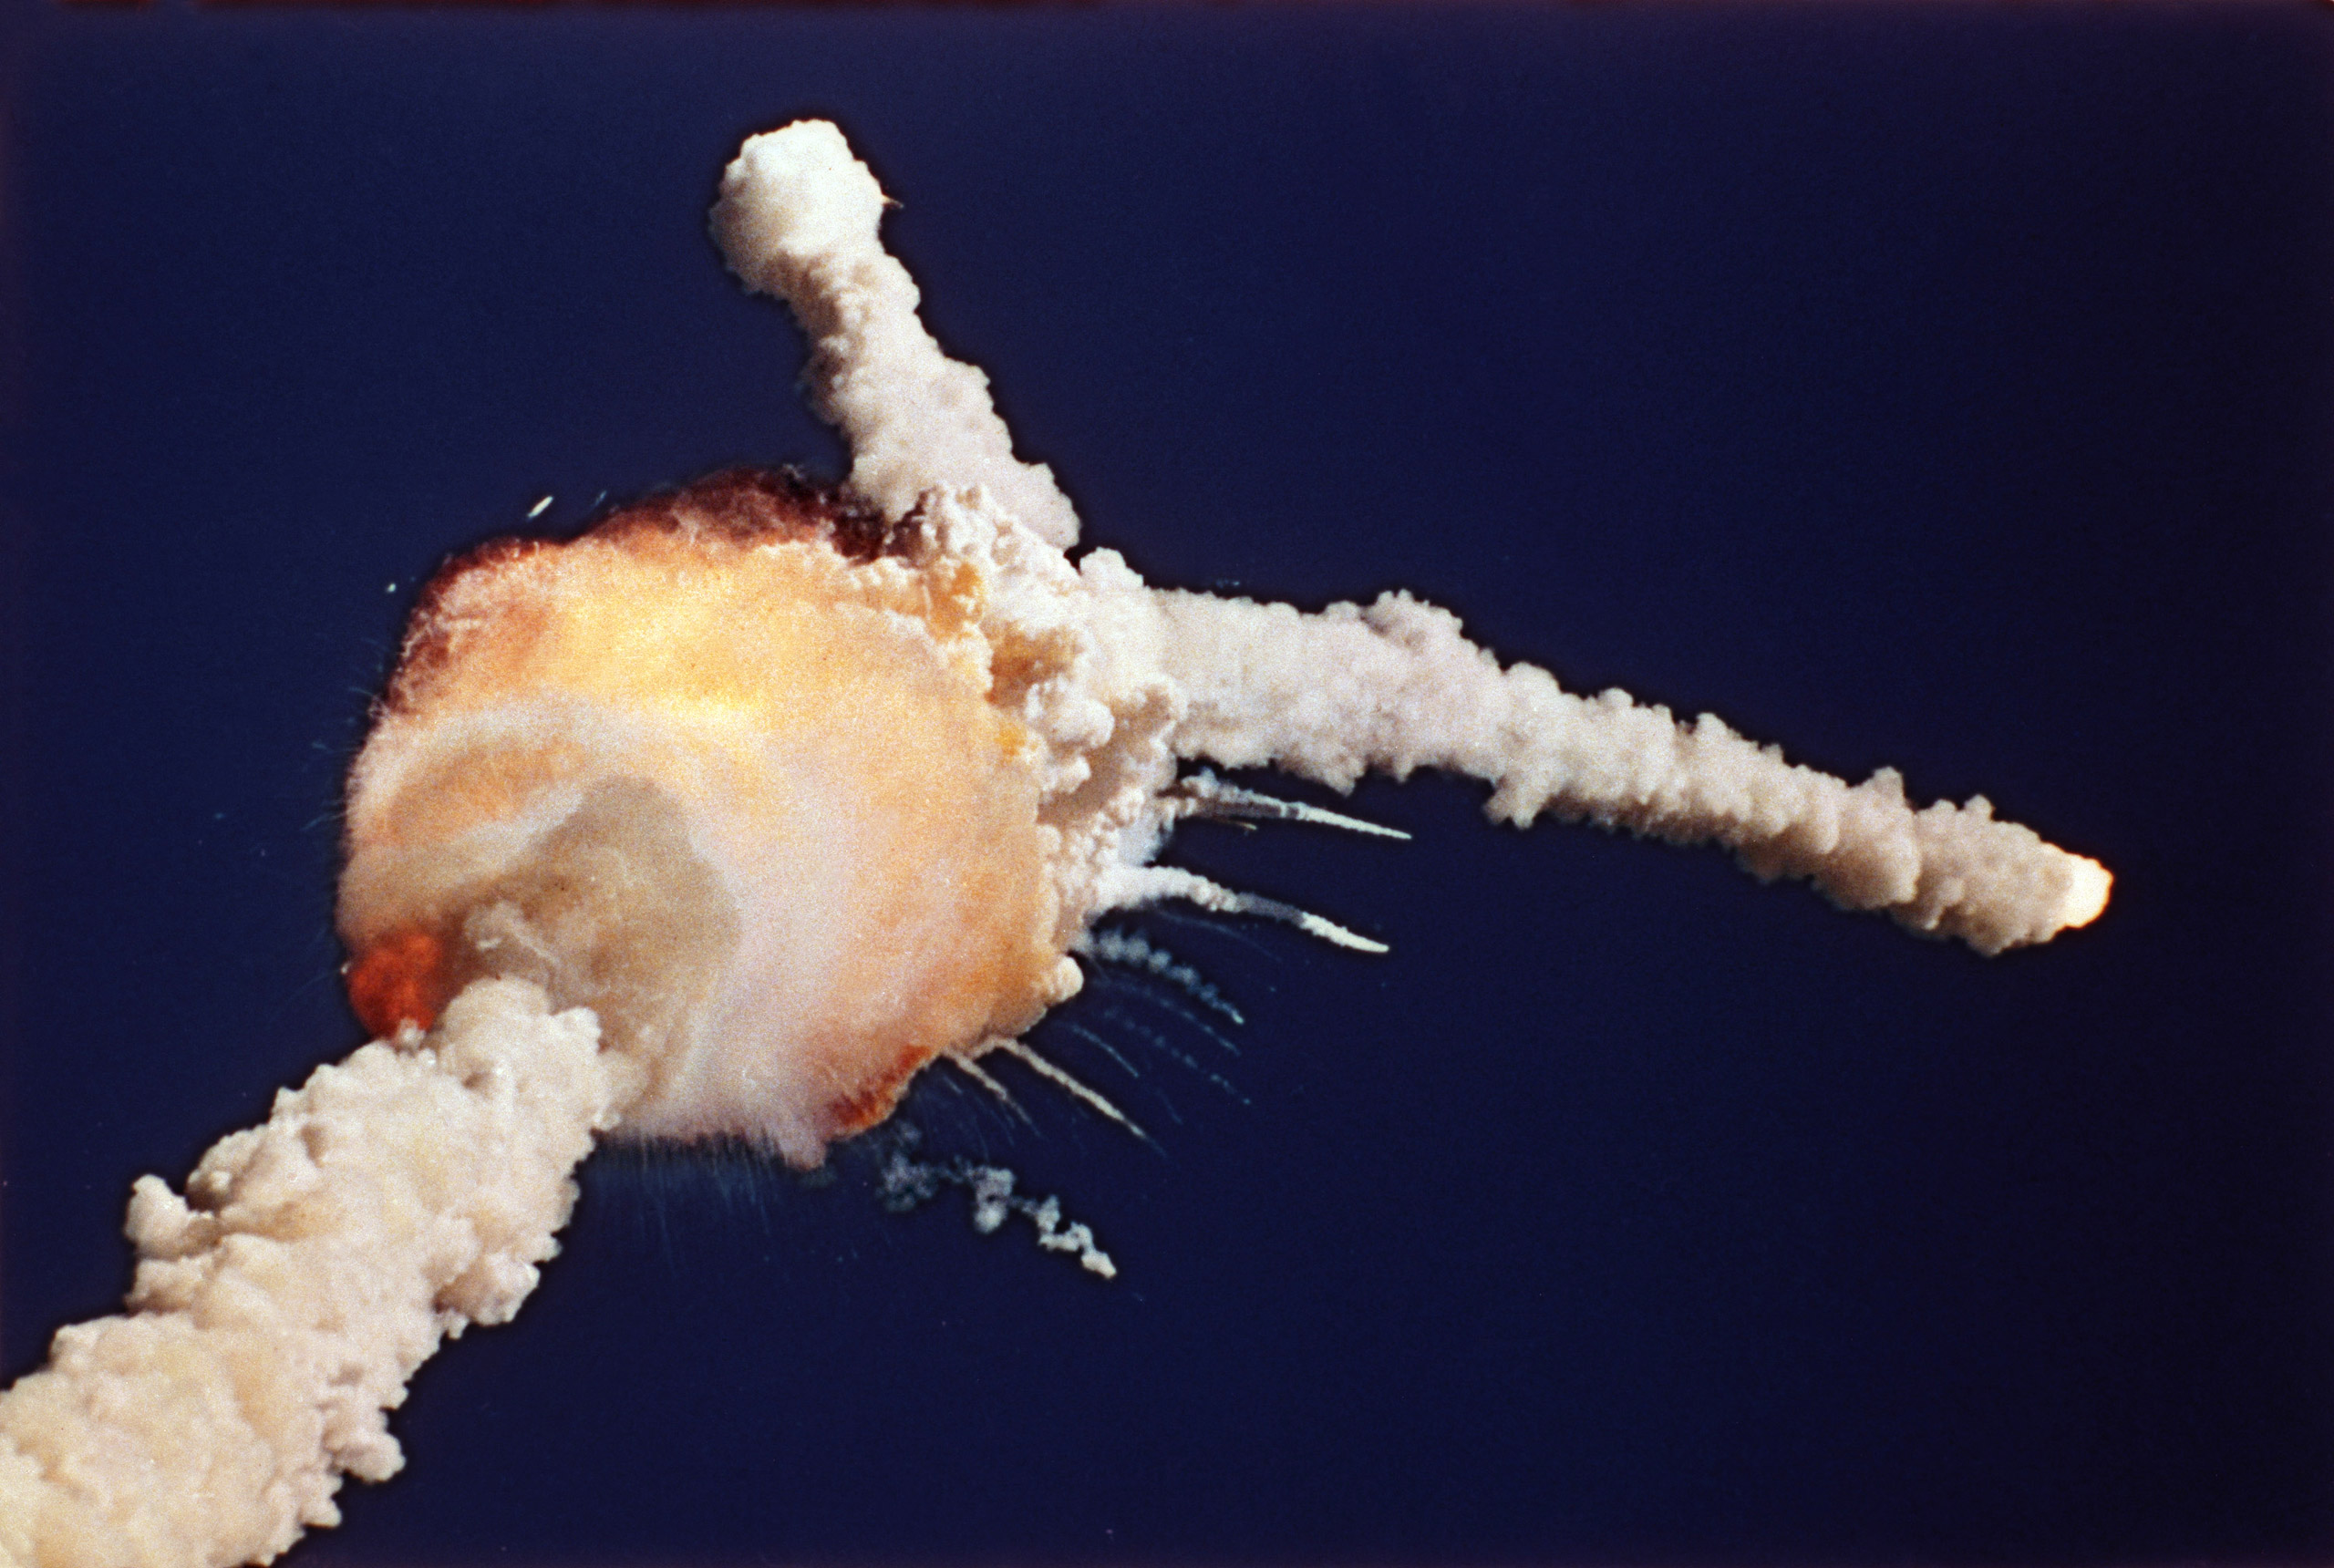 The Space Shuttle Challenger explodes shortly after lifting off from Kennedy Space Center, Fla., Tuesday, Jan. 28, 1986. All seven crew members died in the explosion, which was blamed on faulty o-rings in the shuttle's booster rockets. The Challenger's crew was honored with burials at Arlington National Cemetery. (AP Photo/Bruce Weaver)